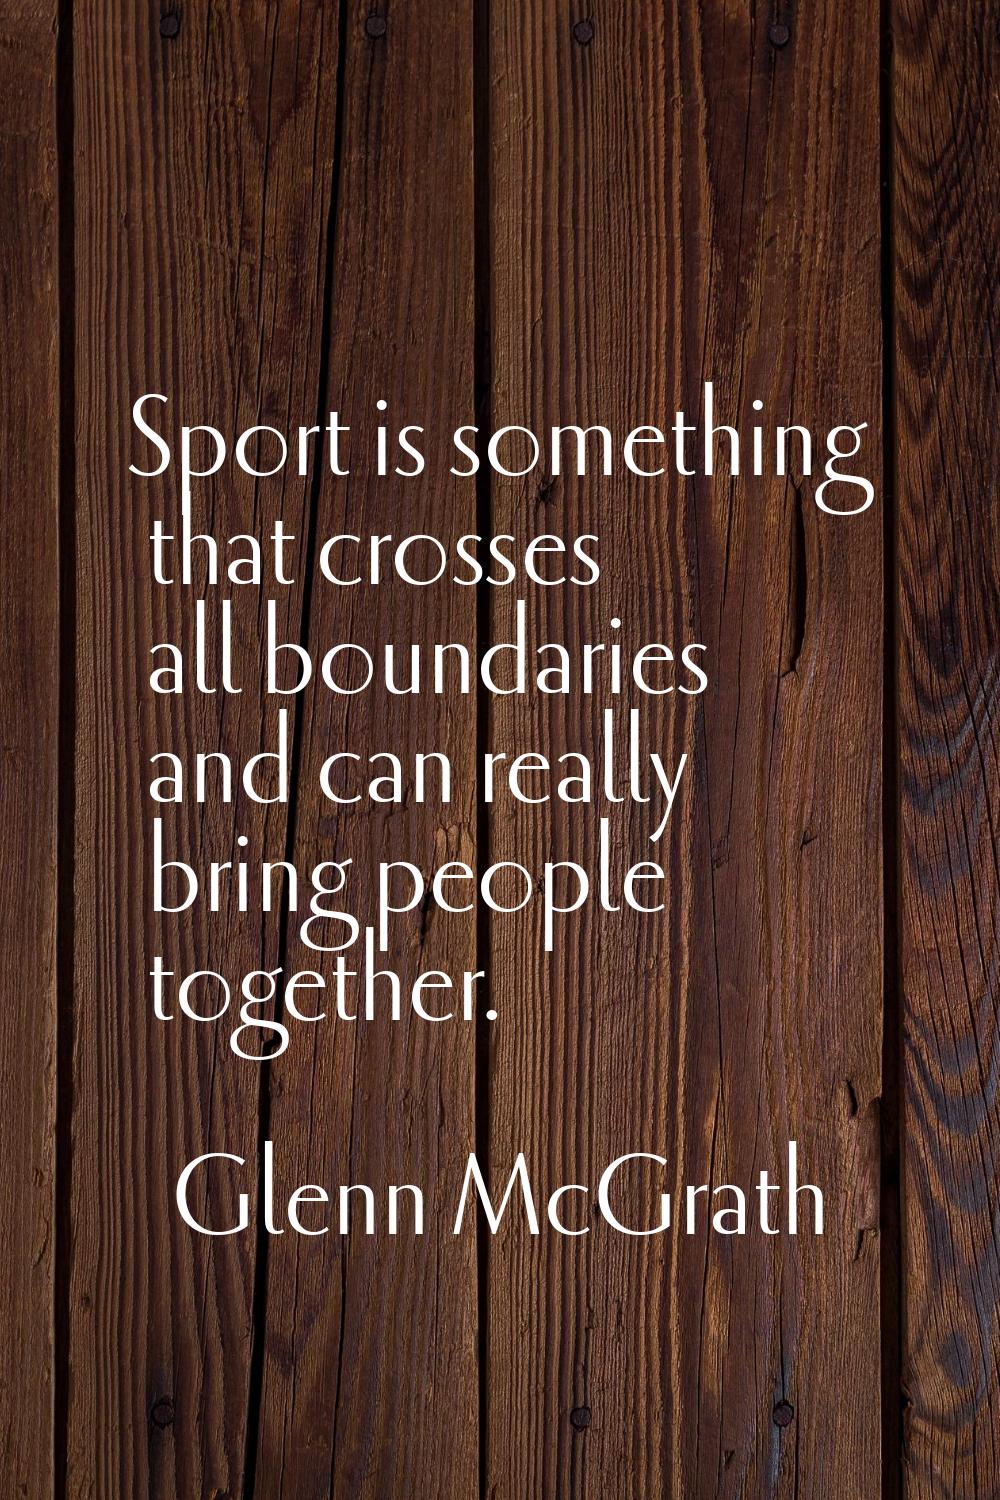 Sport is something that crosses all boundaries and can really bring people together.